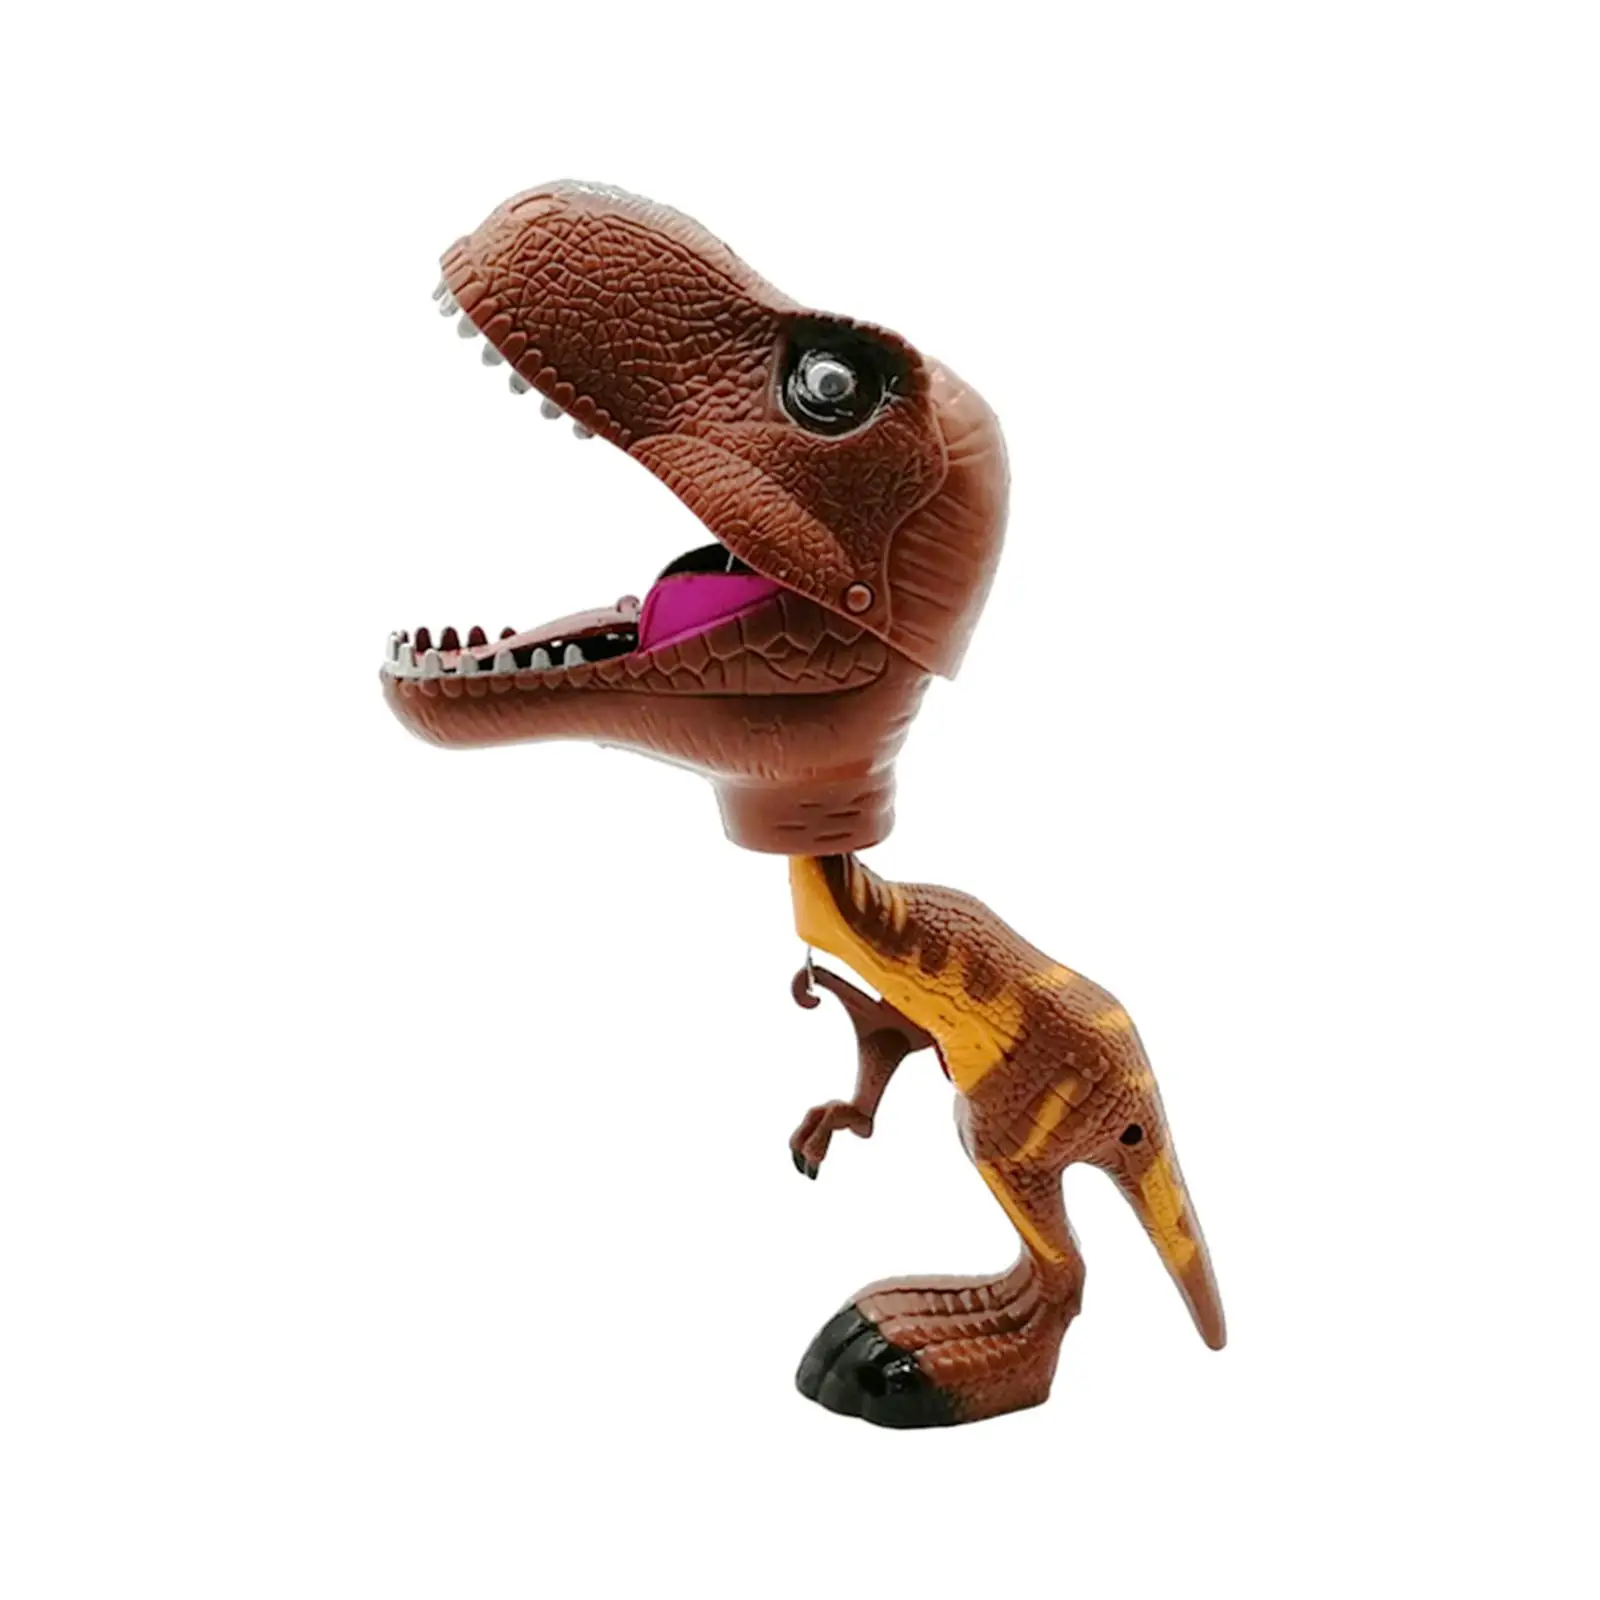 Dinosaur Hand Puppet Toys Toy Reacher Hand Eye Coordination Learning Toy Novelty